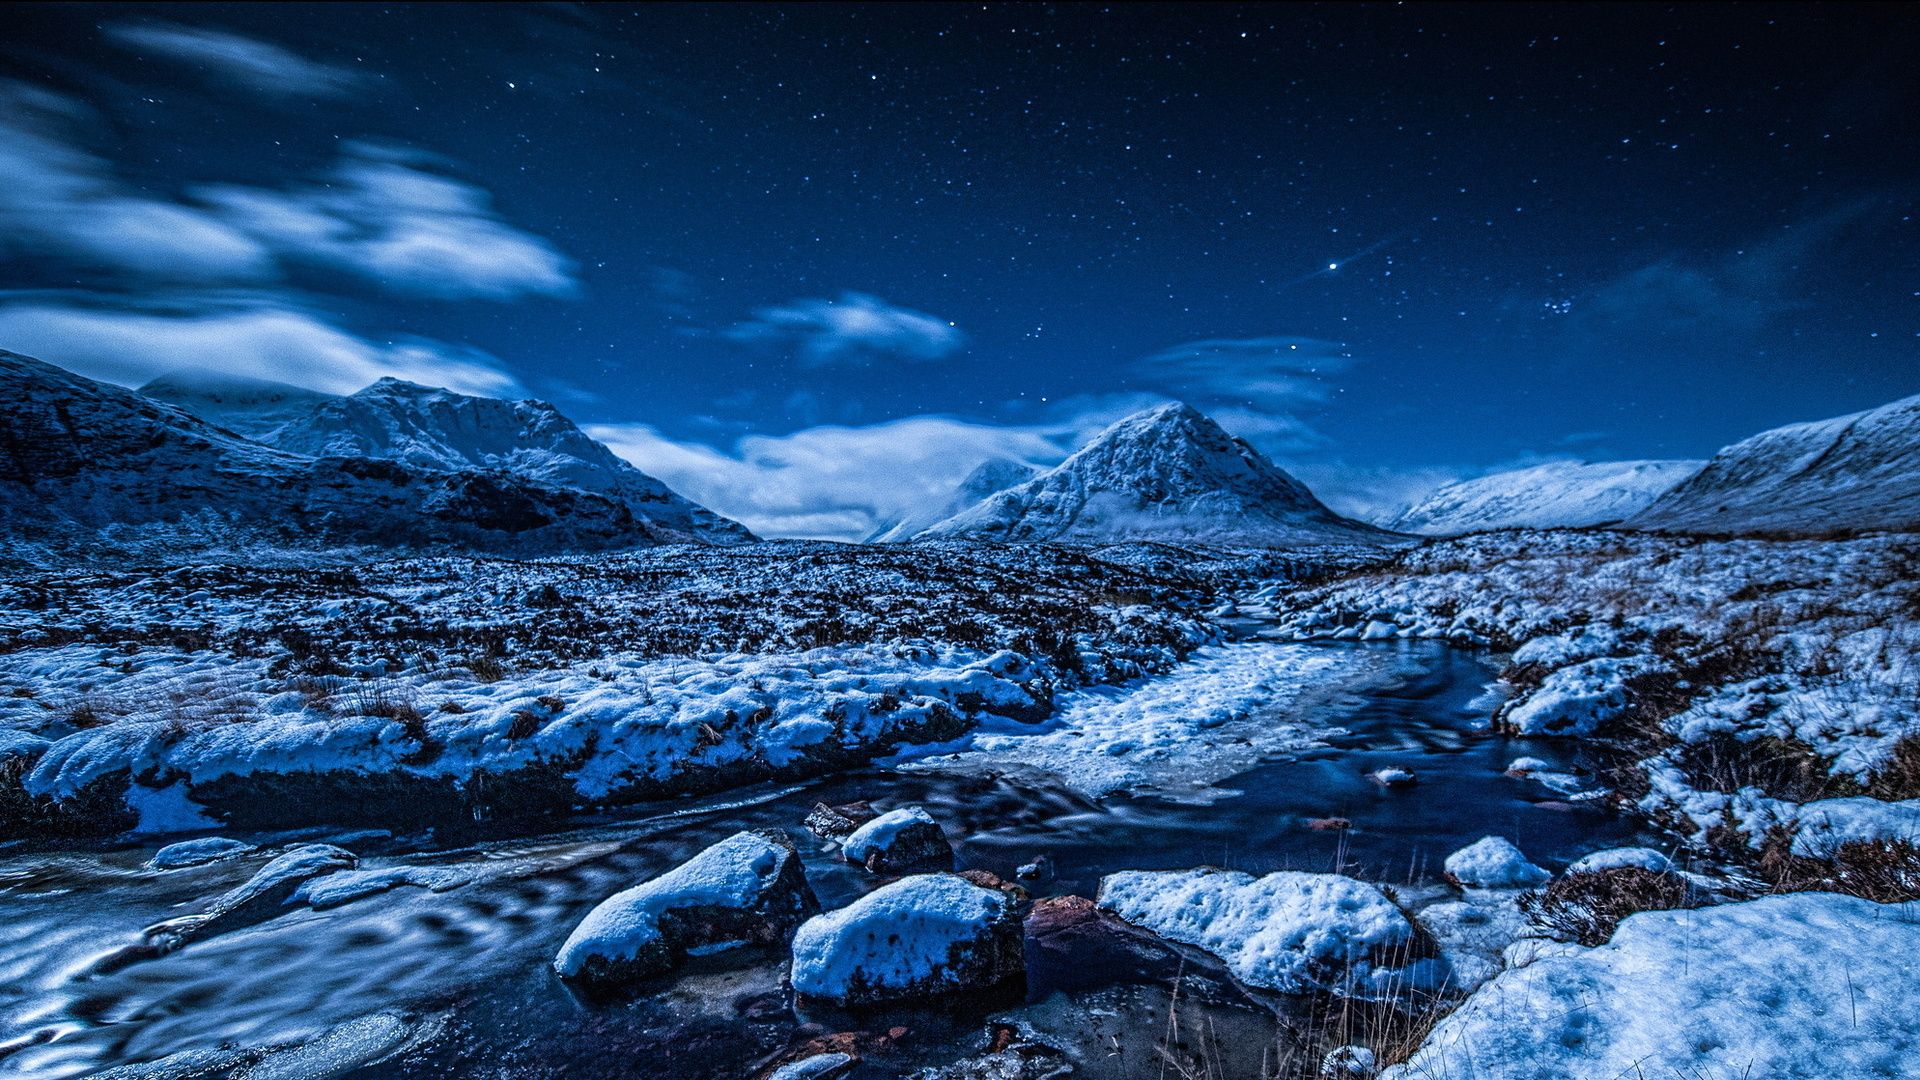 Winter Mountains Night Wallpapers - Wallpaper Cave